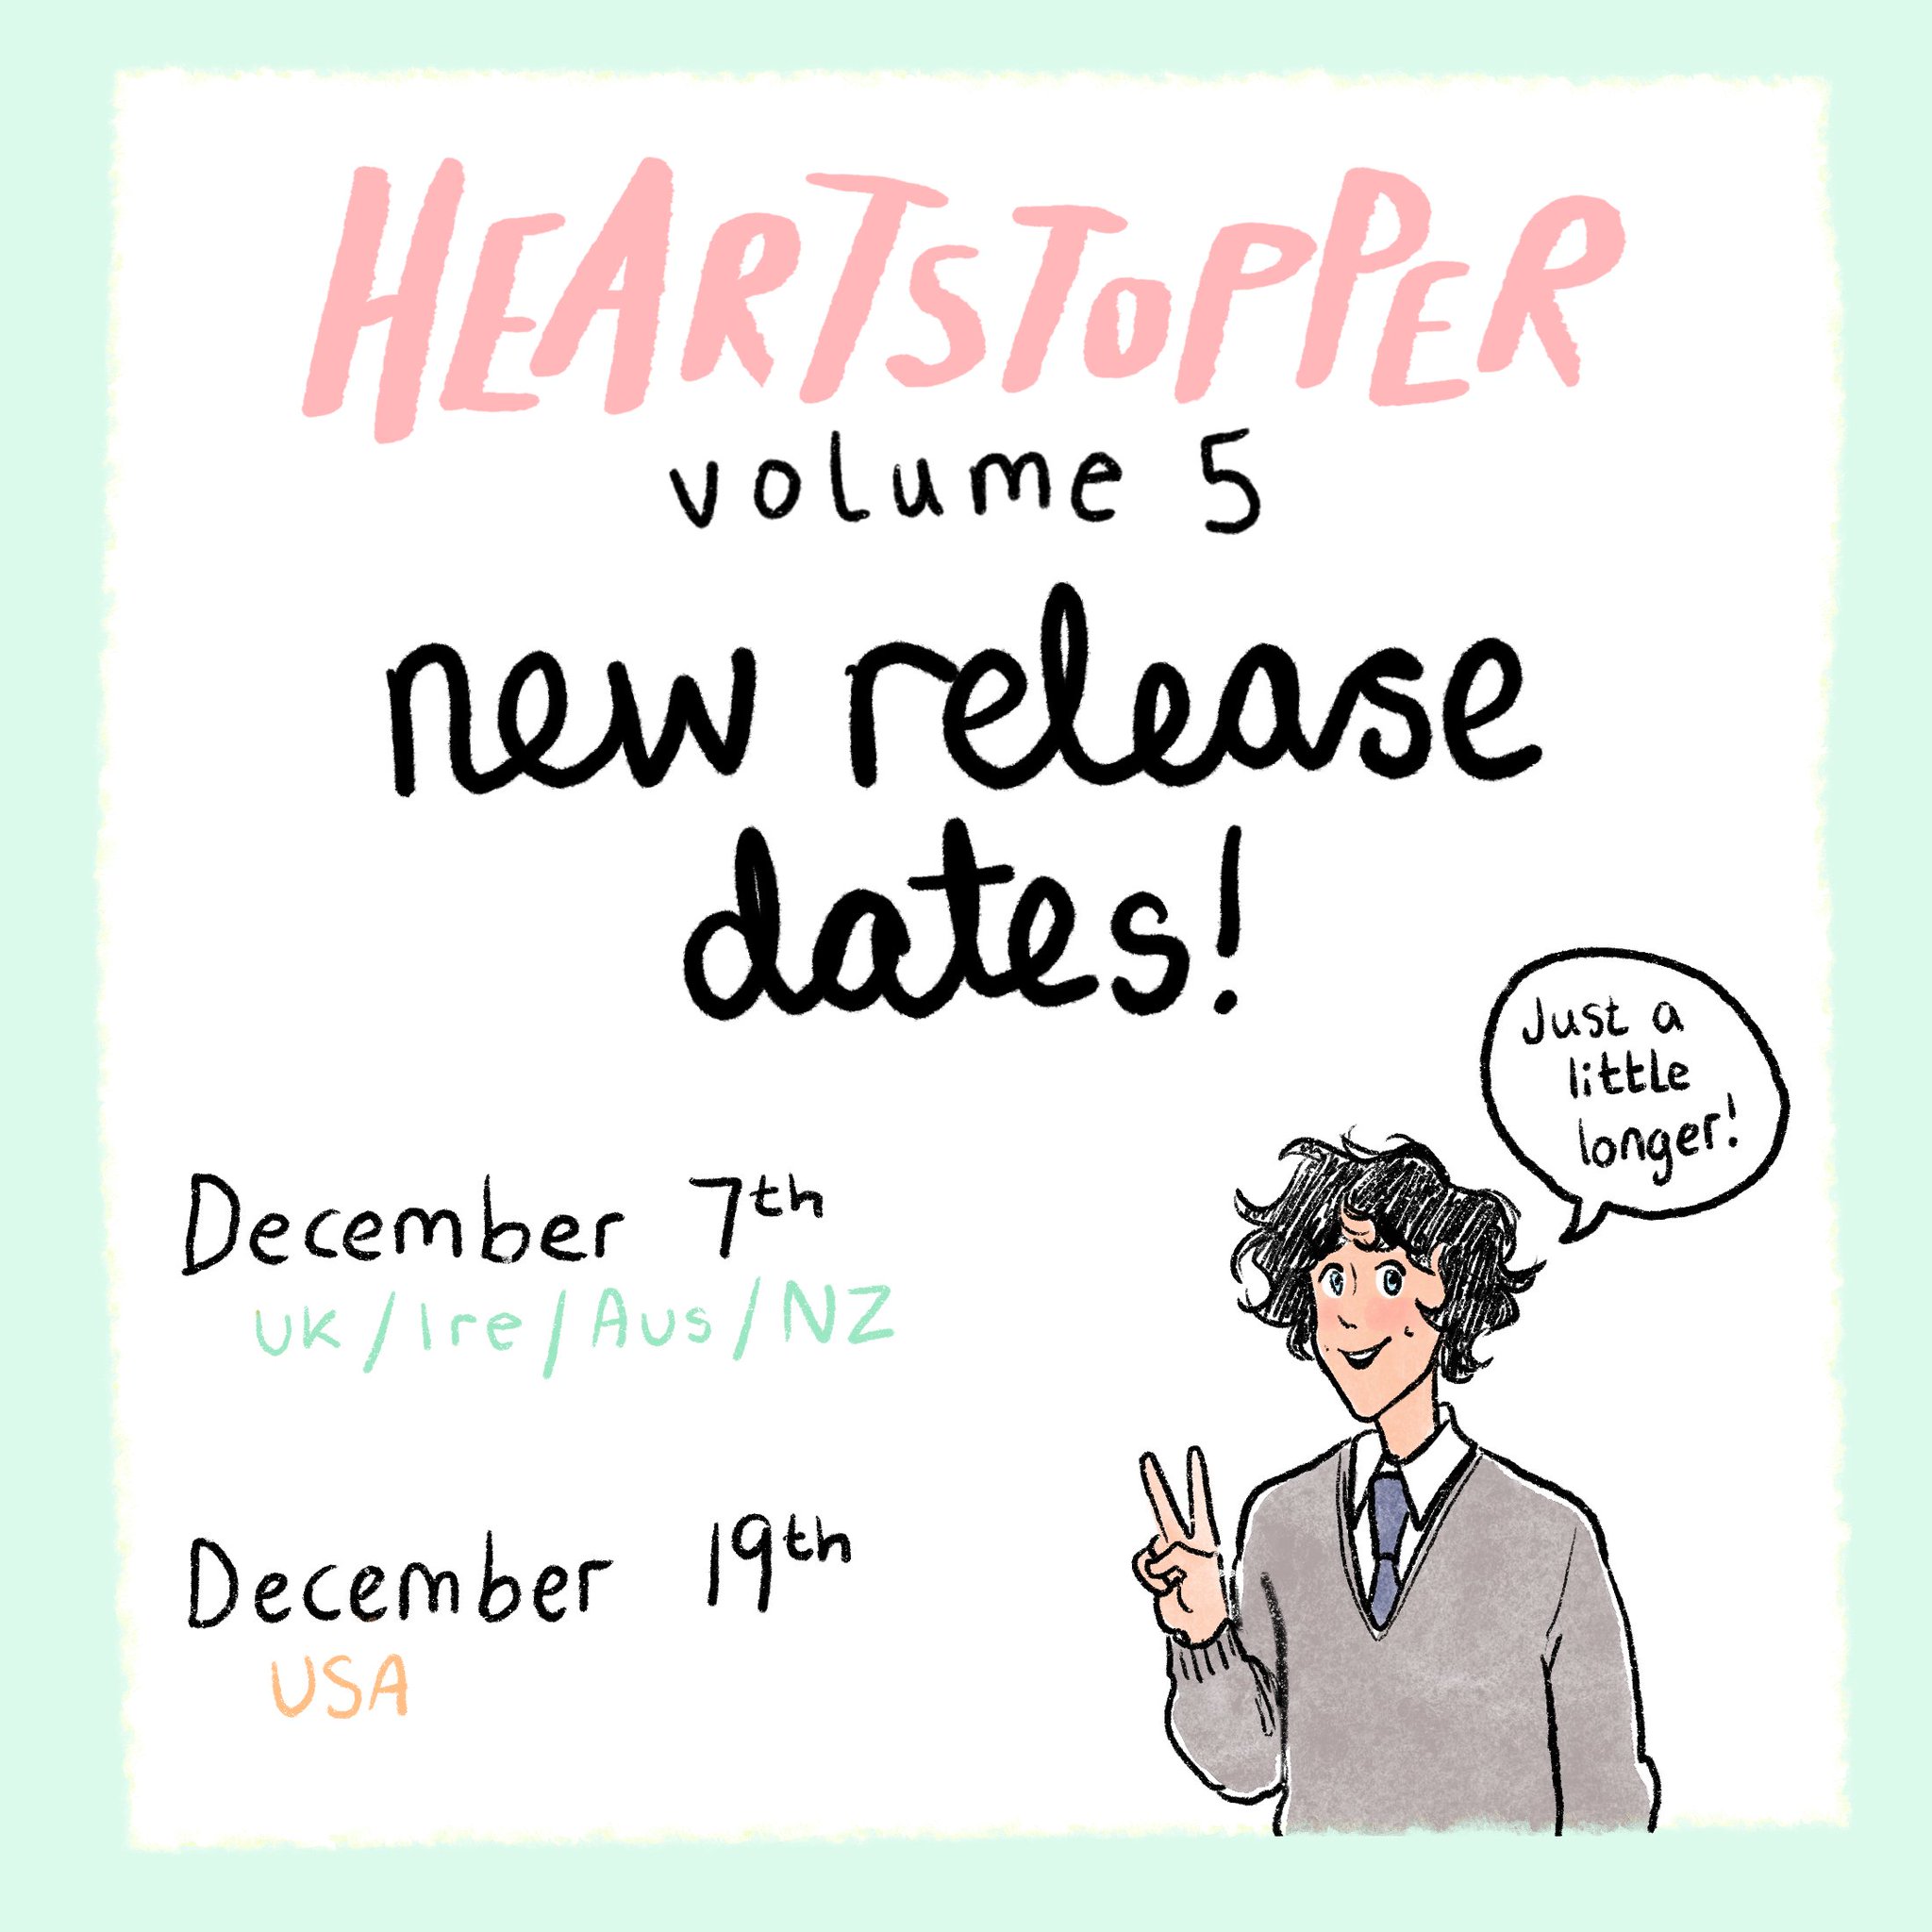 Alice Oseman Updates on X: 📣 The Heartstopper Volume 5 publication date  is moving to December 7th (UK/Ire/Aus/NZ) and December 19th (US)! 📣   / X